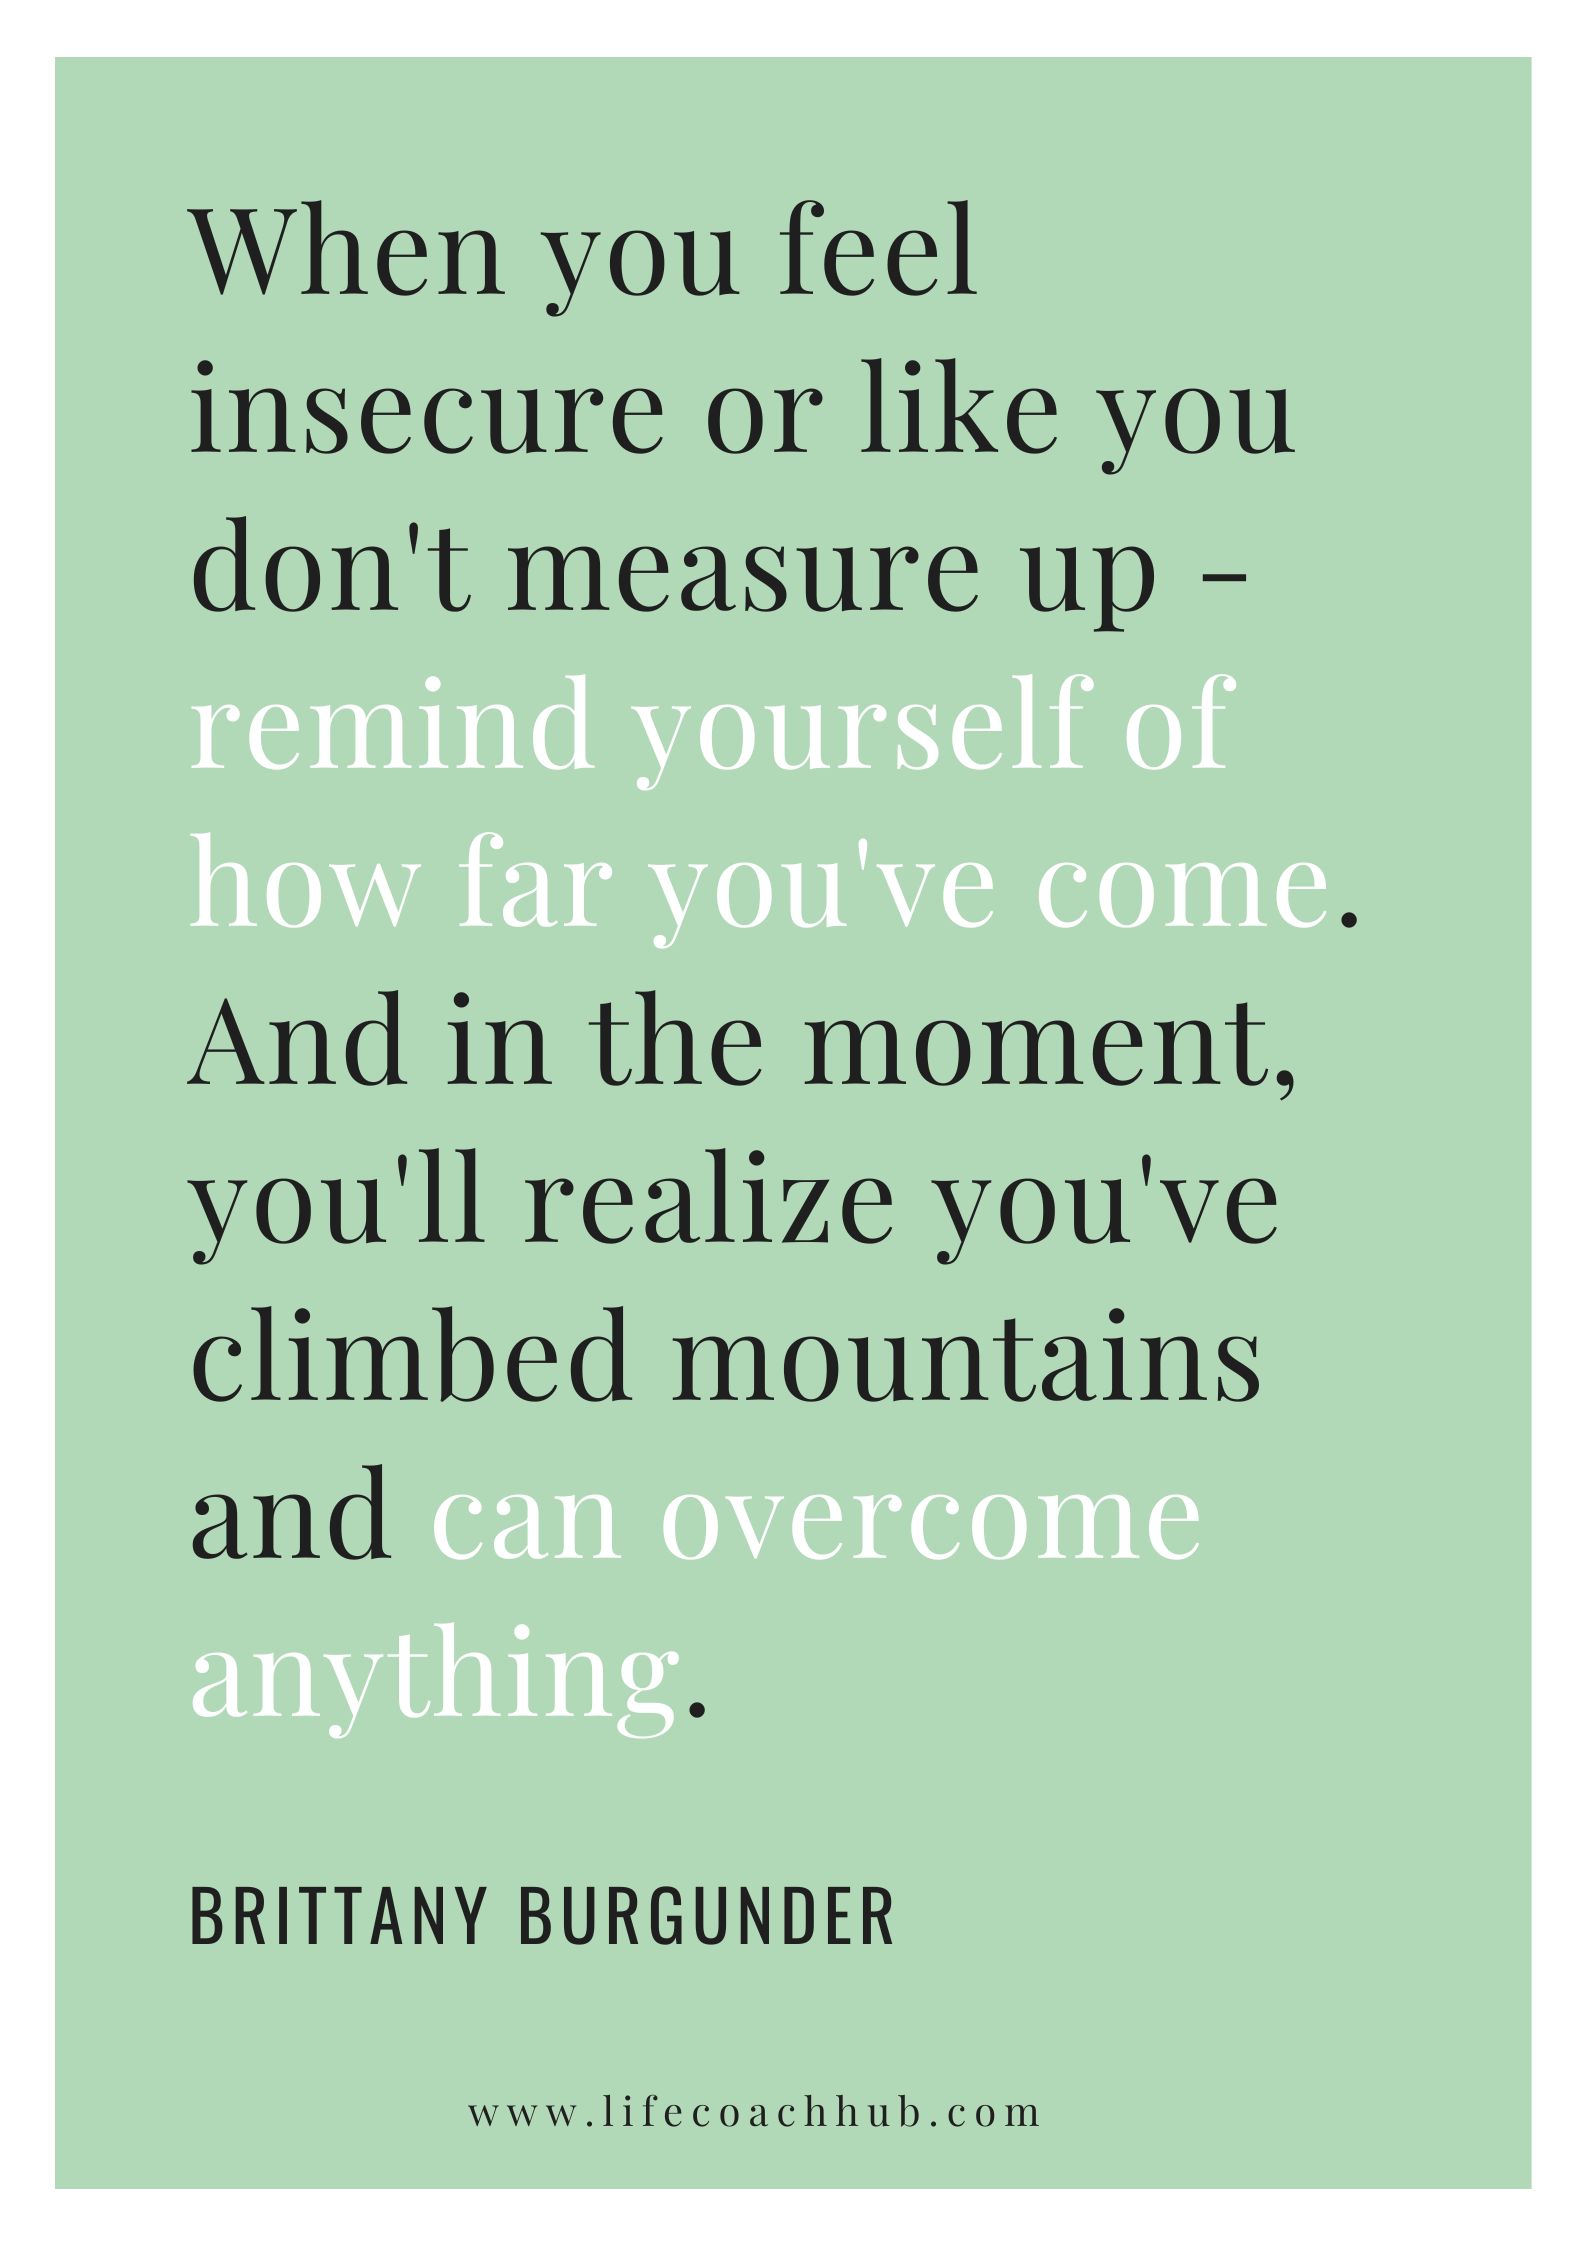 When you feel insecure or like you don't measure up - remind yourself of how far you've come. And in the moment, you'll realize you've climbed mountains and can overcome anything. Brittany Burgunder, coaching tip